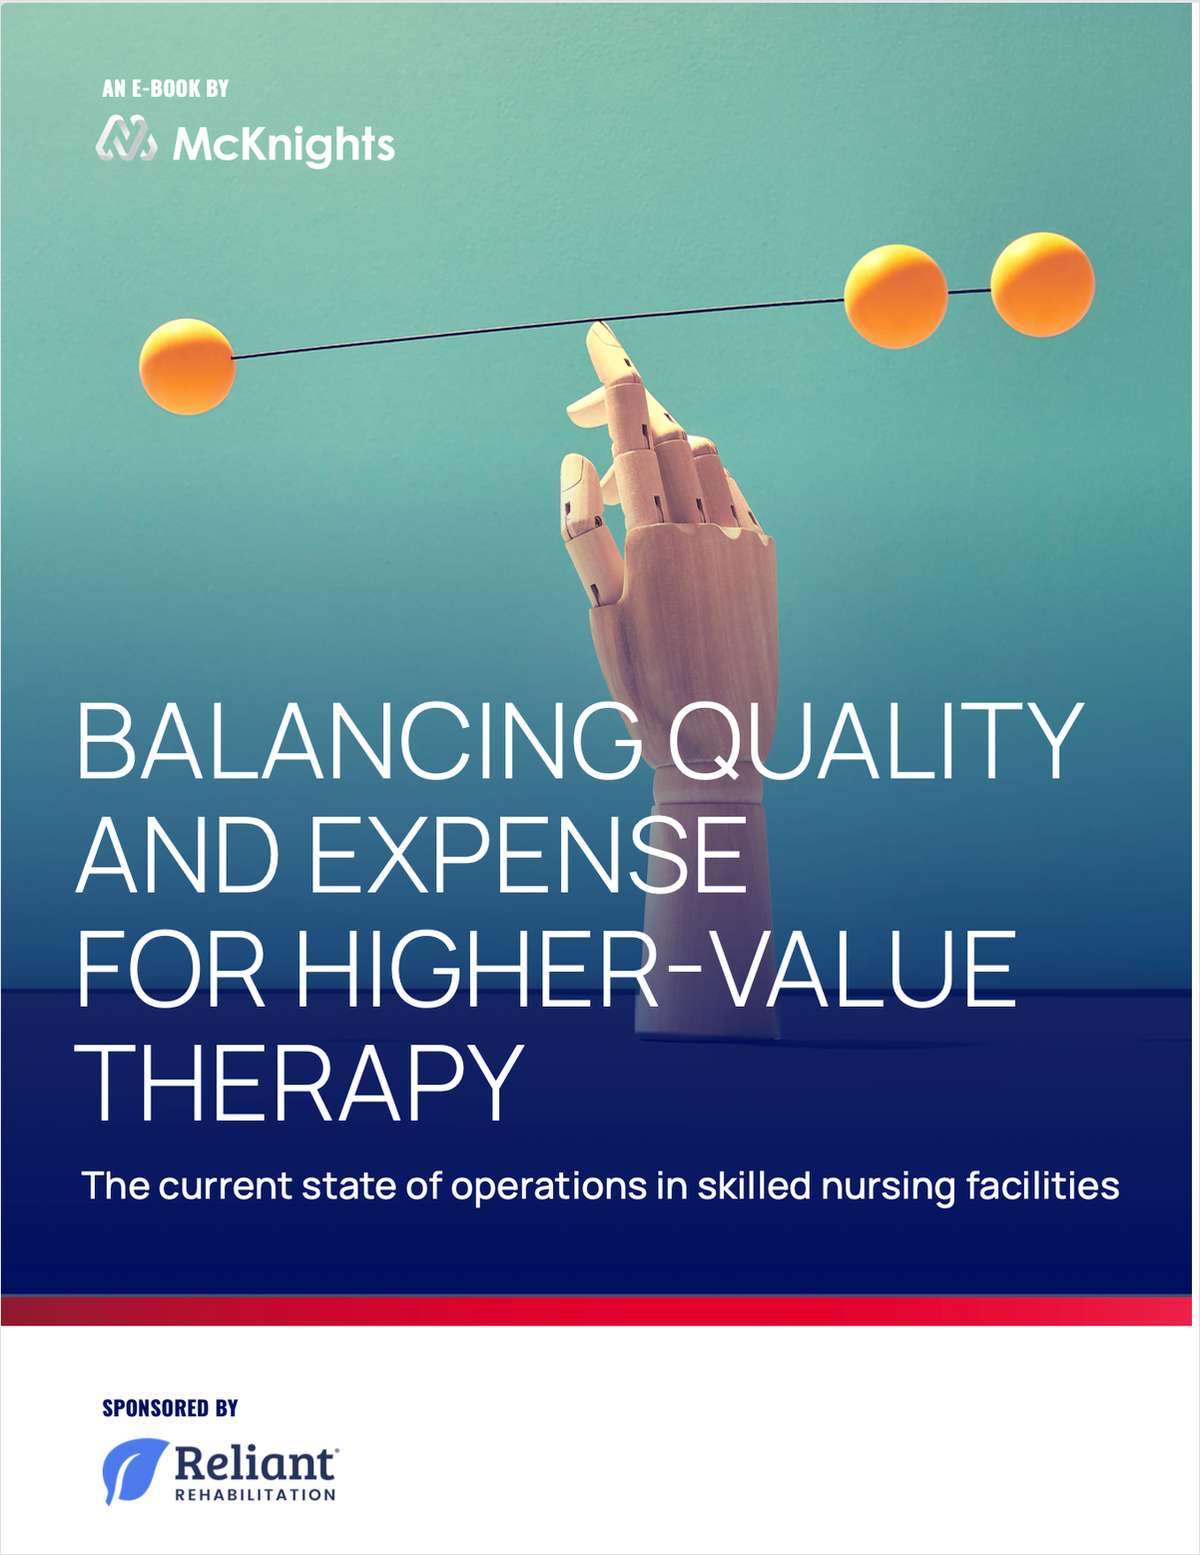 Balancing Quality And Expense For Higher-Value Therapy